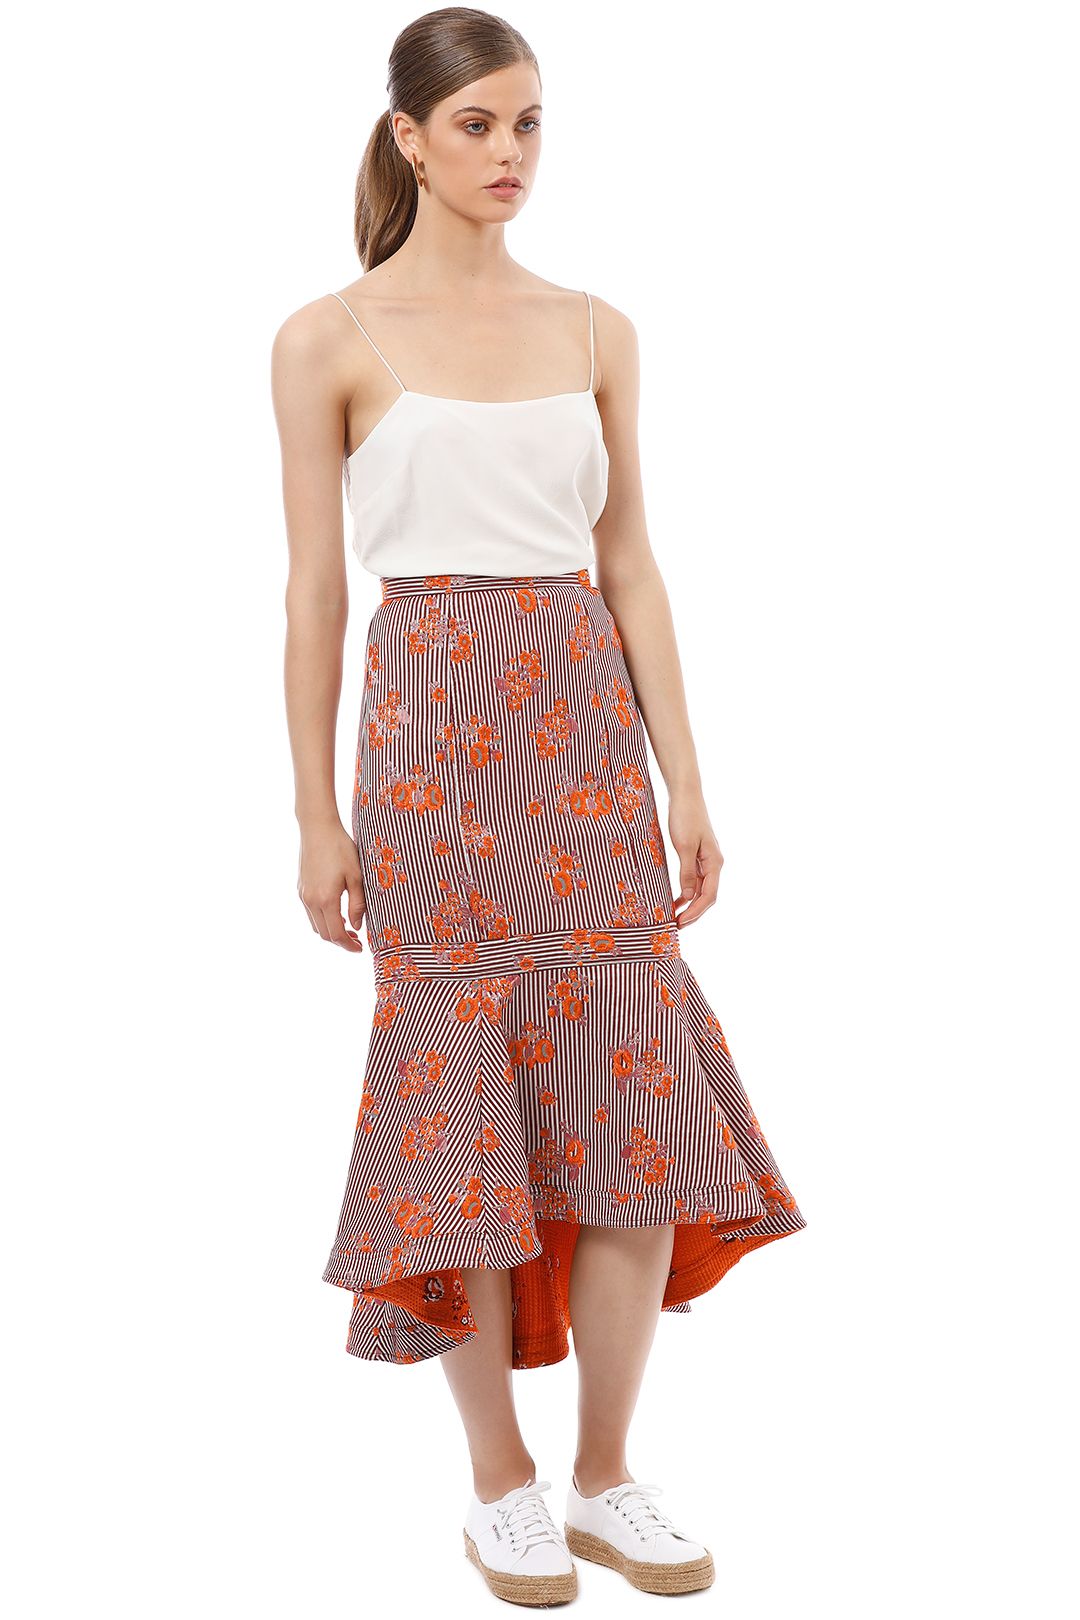 CMEO Collective - Fixation Skirt - Floral - Side